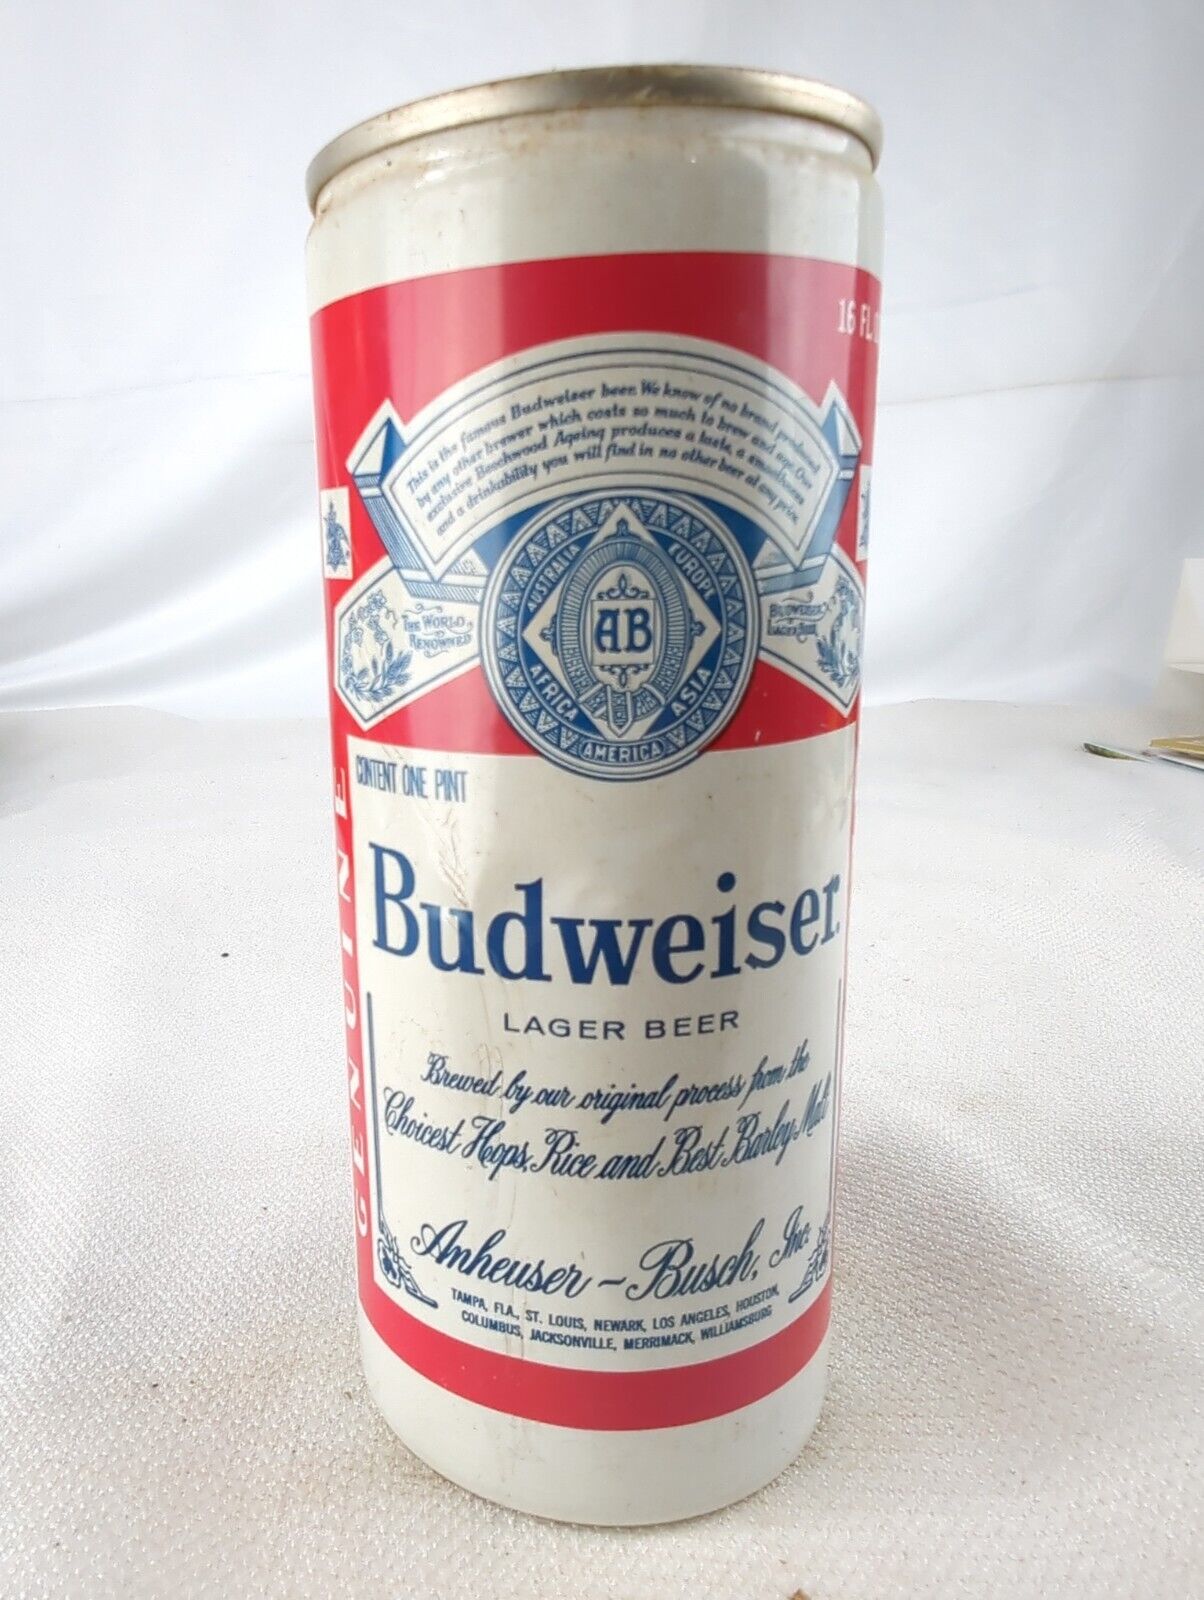 Budweiser Beer - Anheuser Busch Tampa FLA 16 oz One Pint Pull Tab Can